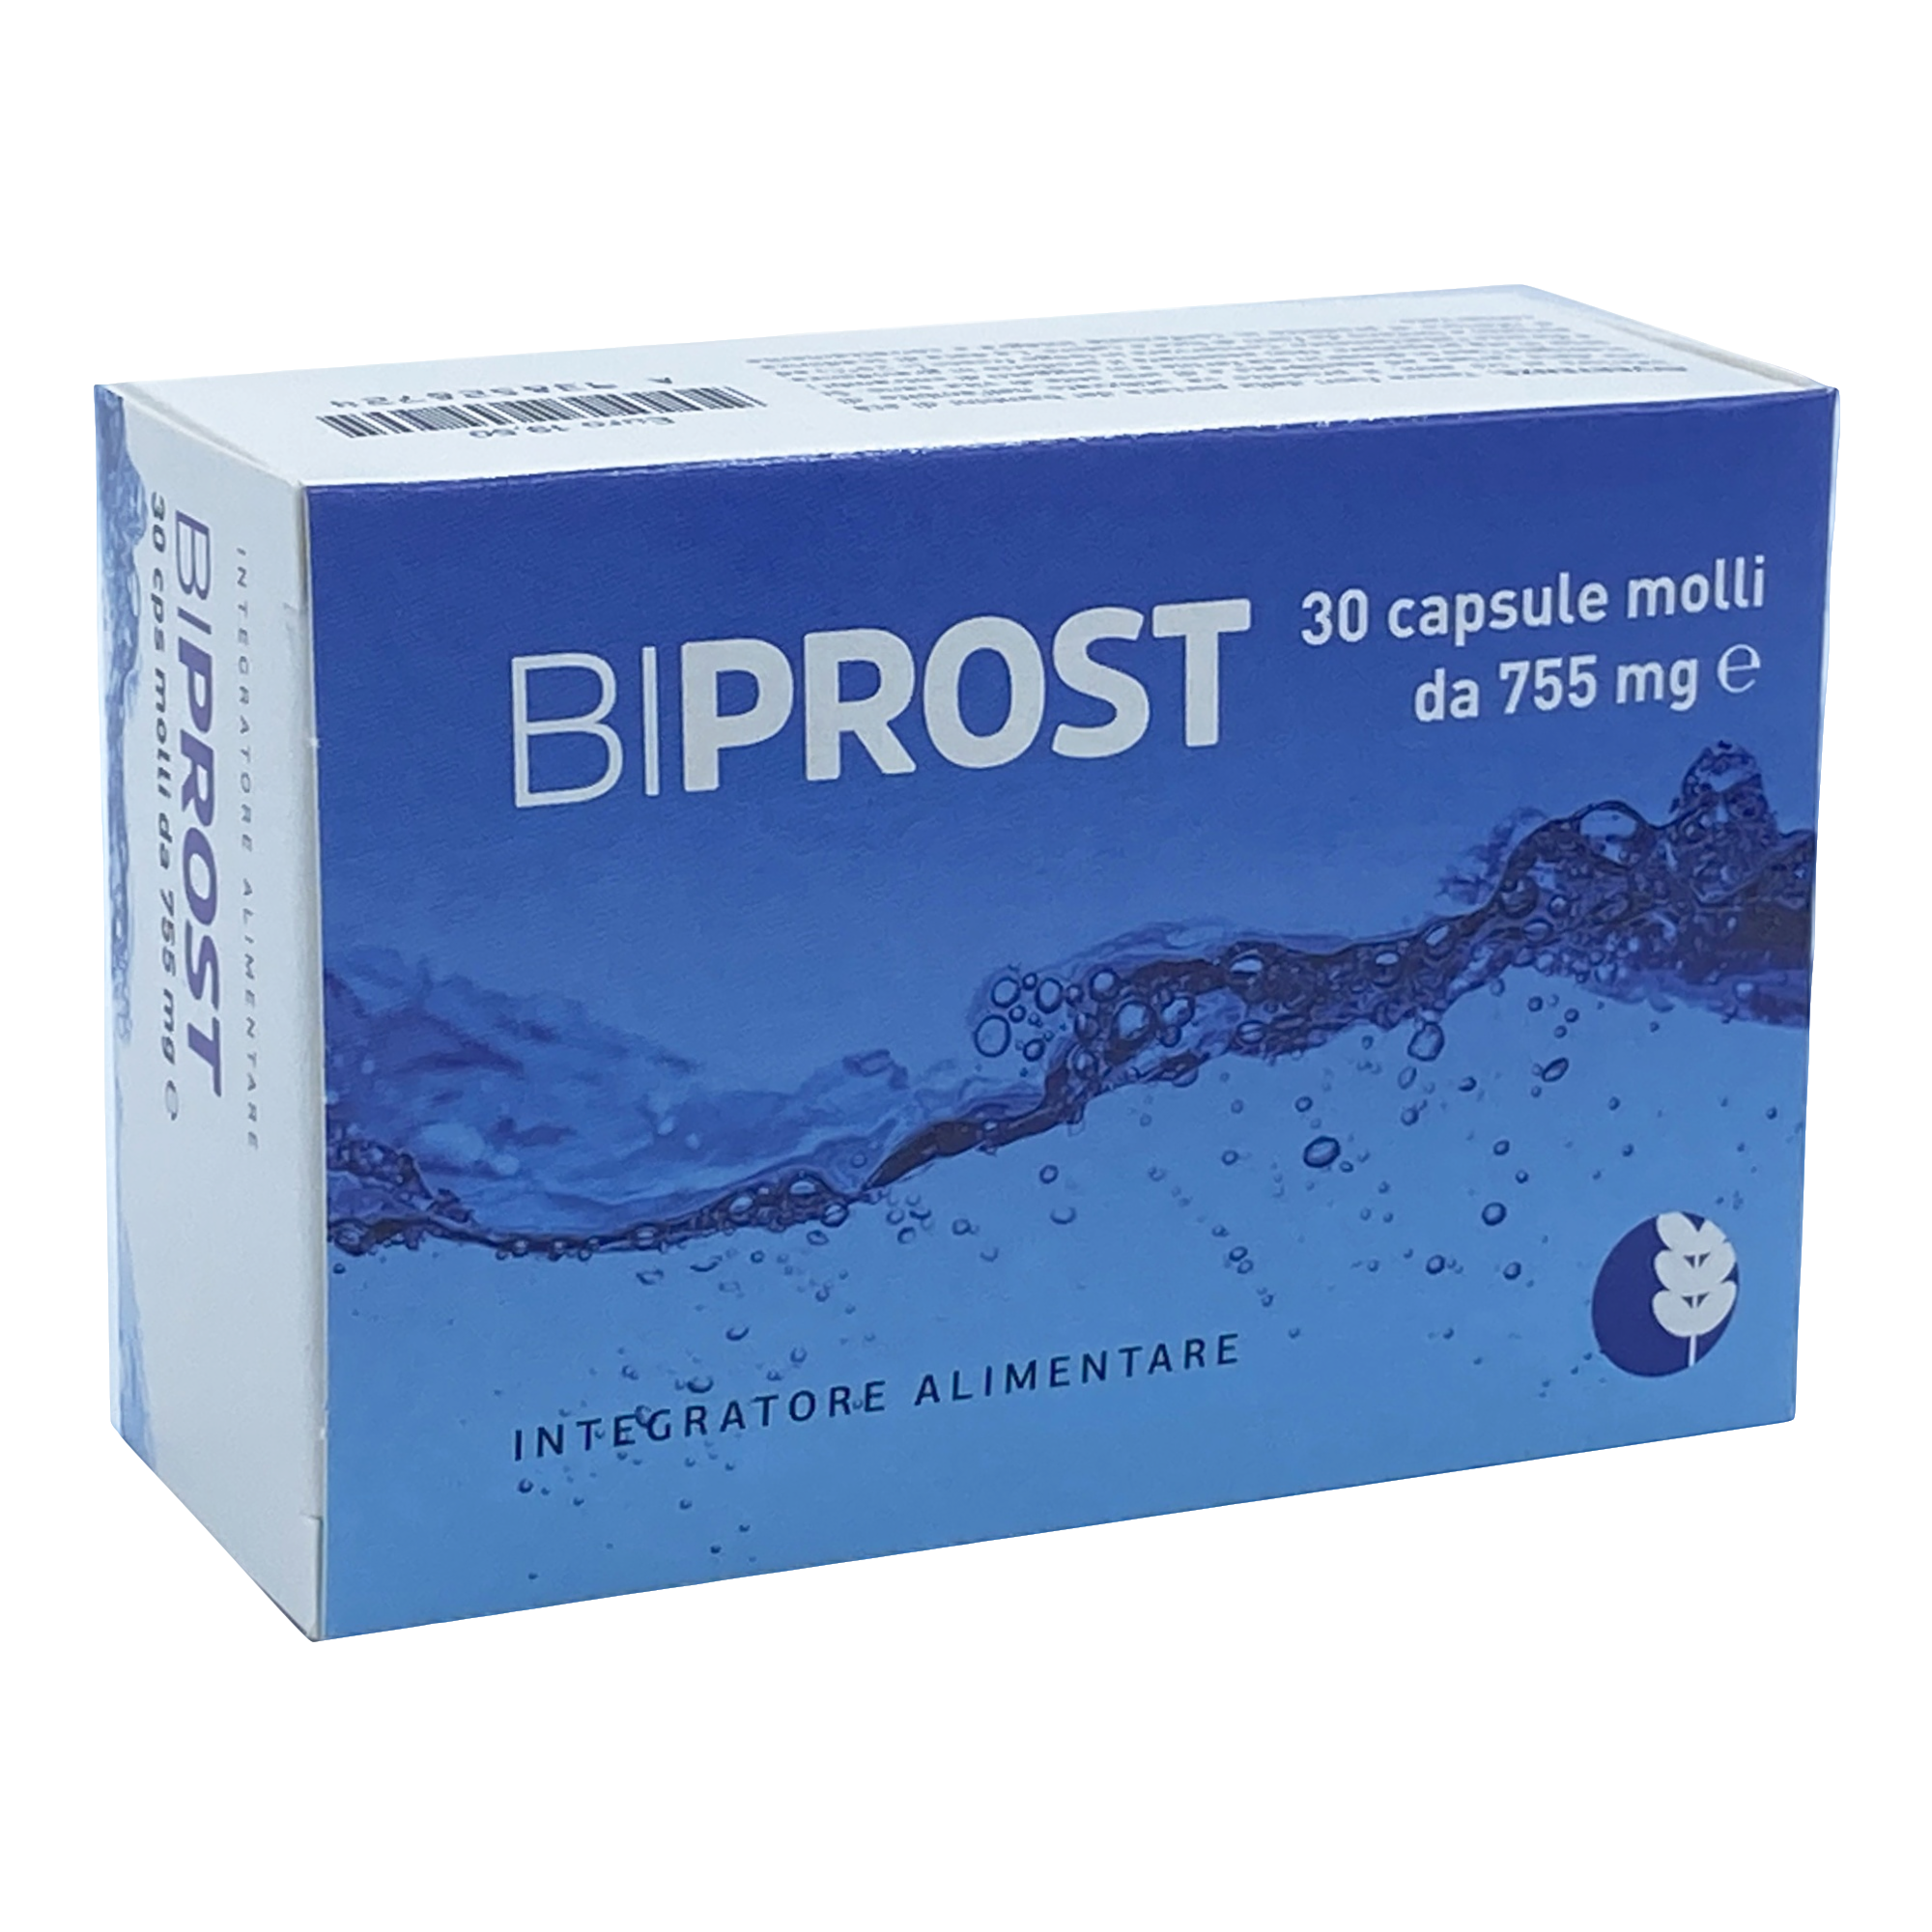 BIPROST 30CPS MOLLI 930MG